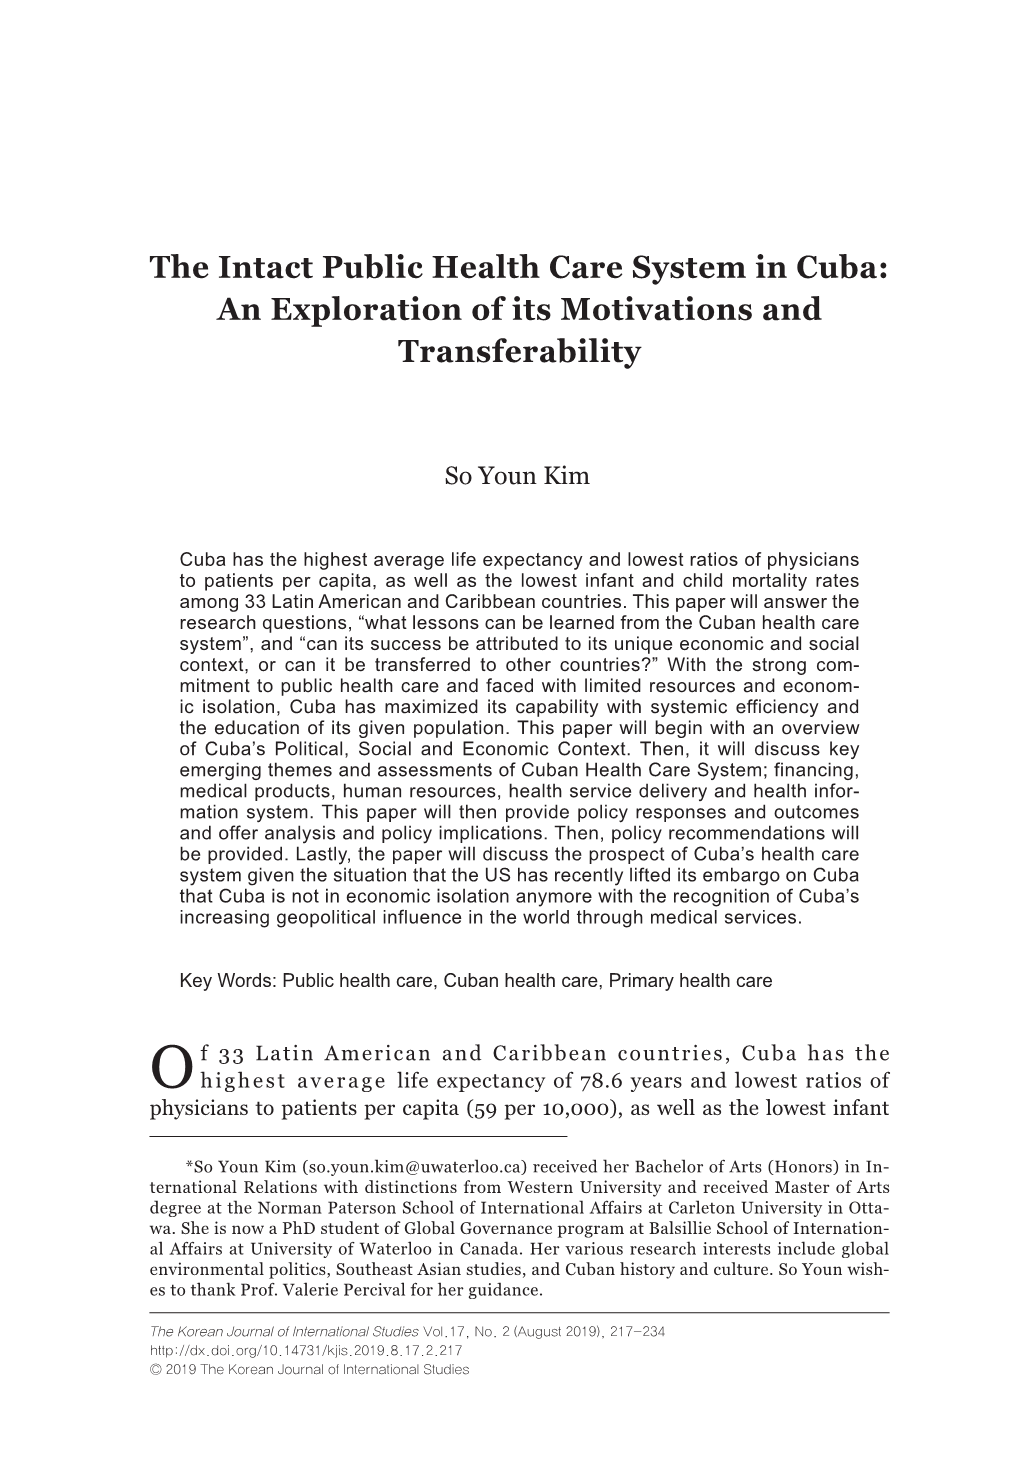 The Intact Public Health Care System in Cuba: an Exploration of Its Motivations and Transferability